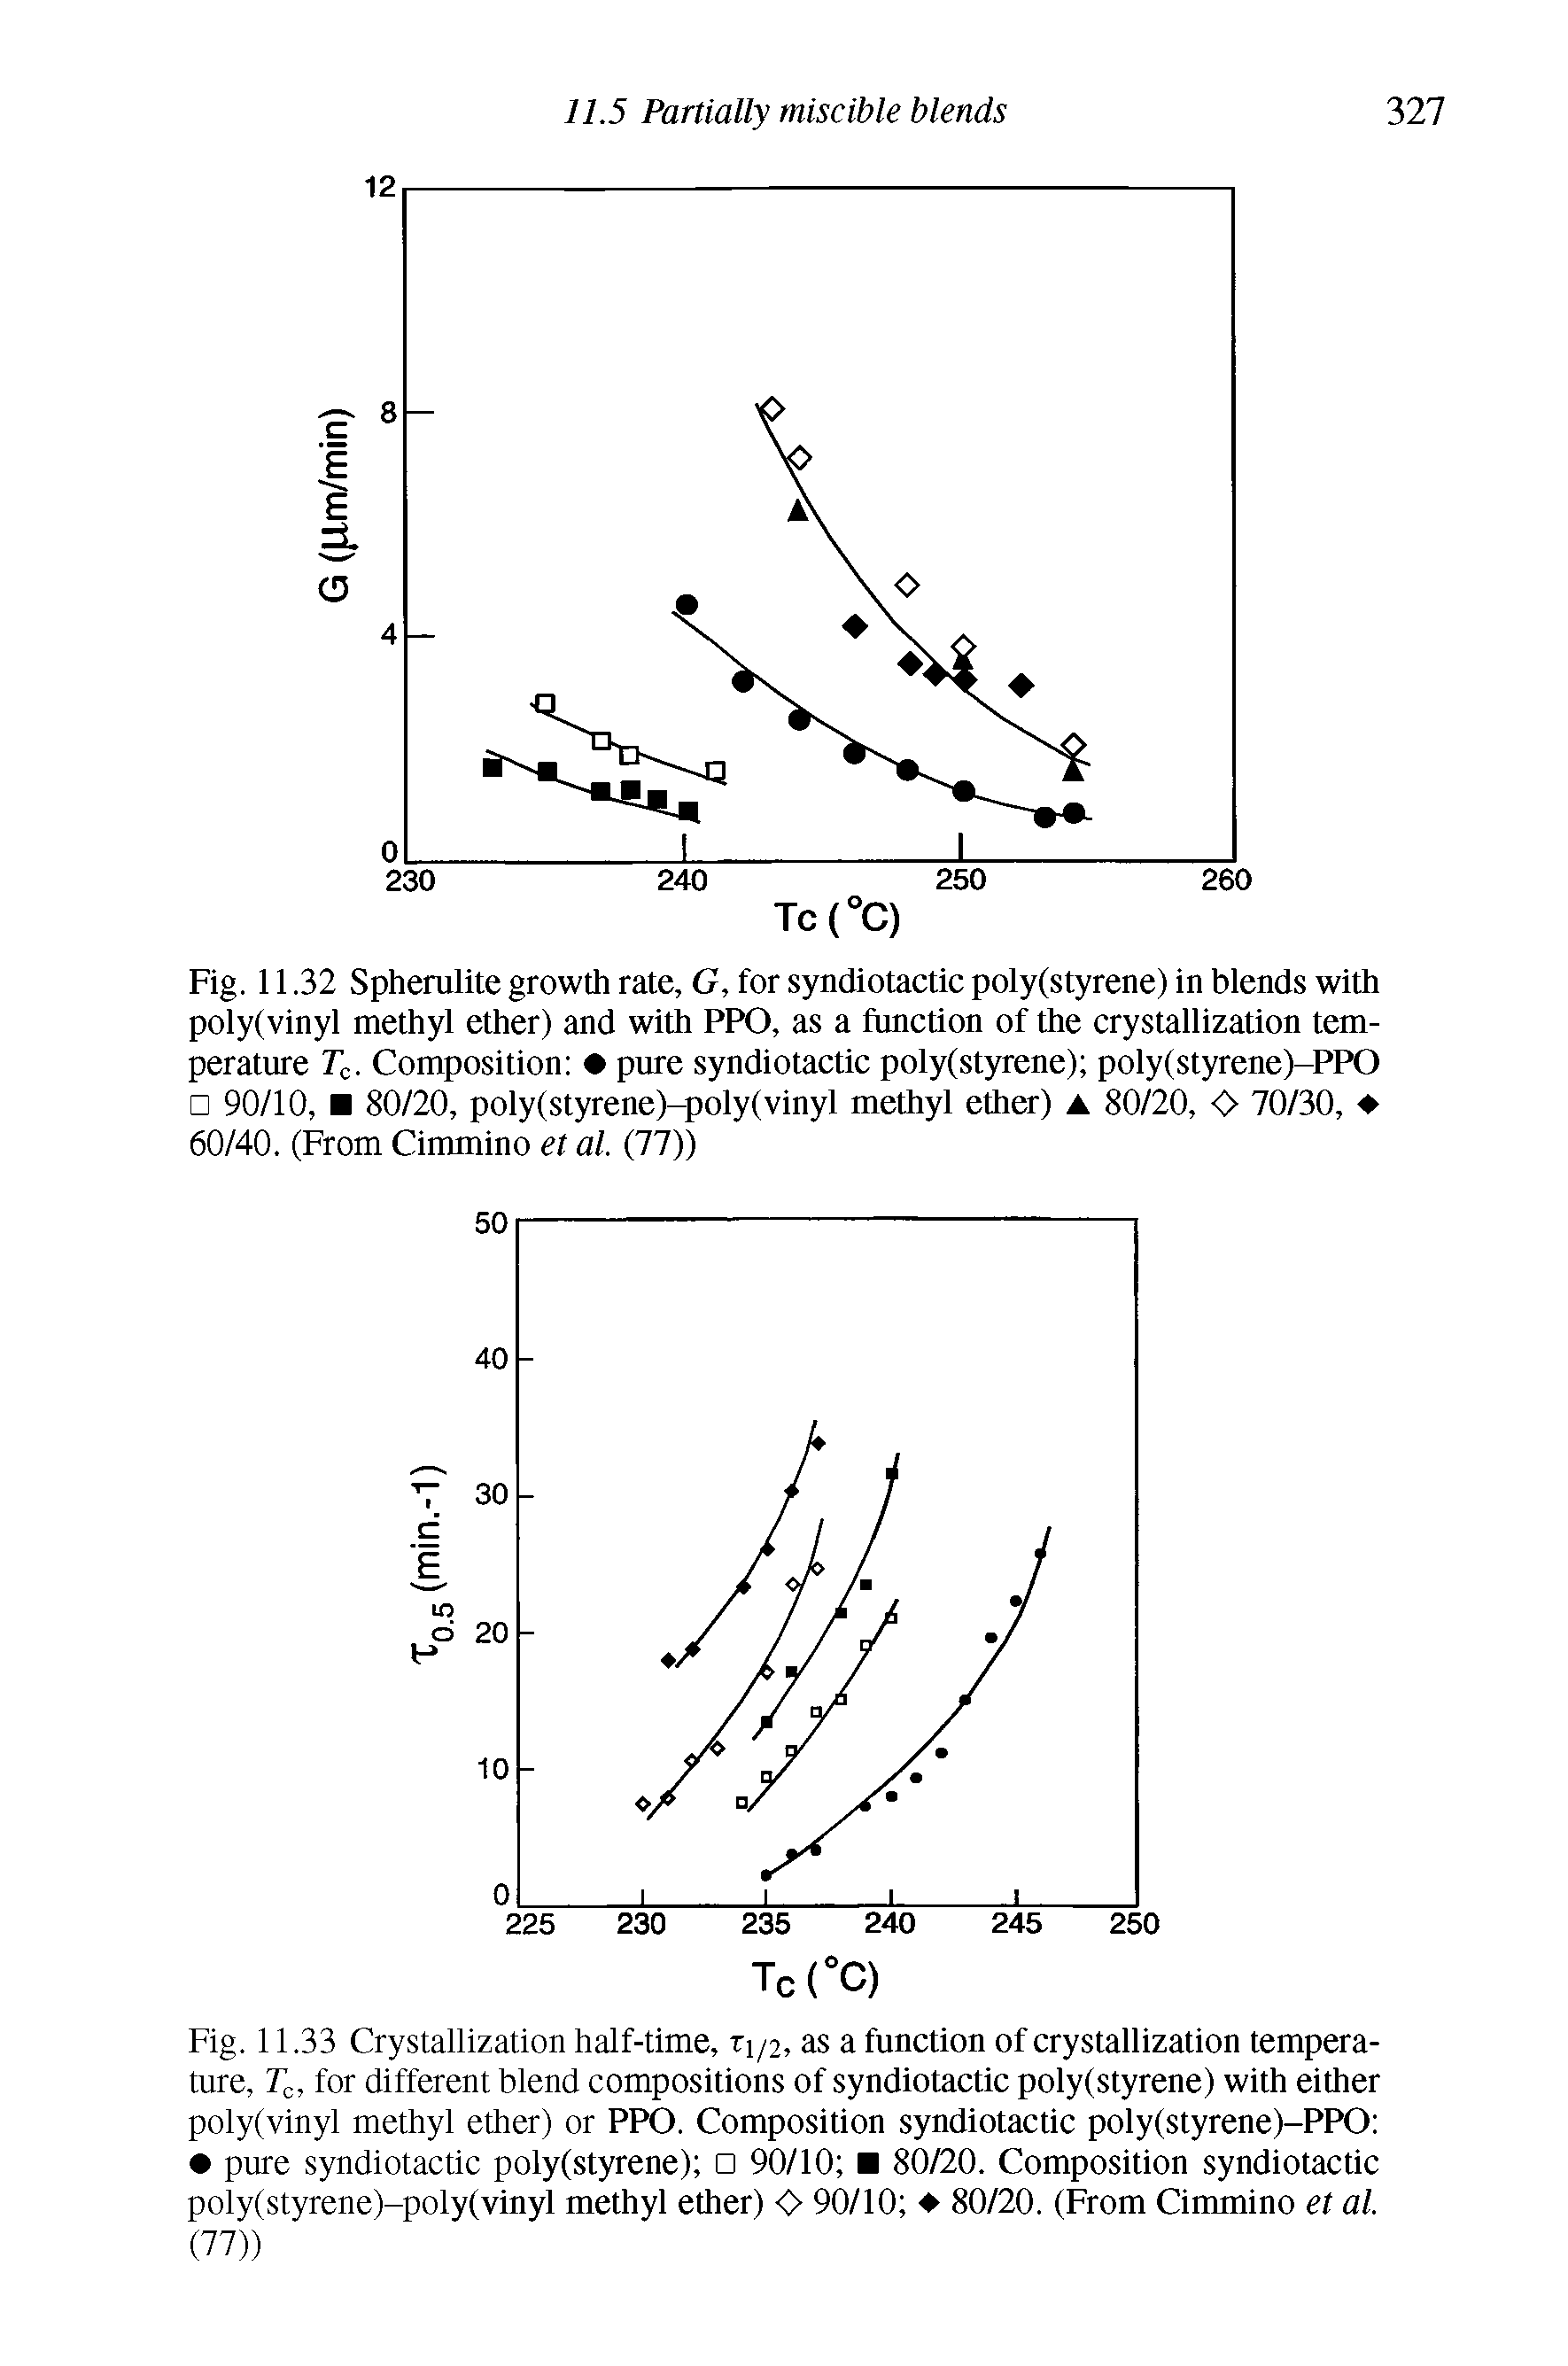 Fig. 11.33 Crystallization half-time, ti/2, as a function of crystallization temperature, To, for different blend compositions of syndiotactic poly(styrene) with either poly(vinyl methyl ether) or PPO. Composition syndiotactic poly(styrene)-PPO pure syndiotactic poly(styrene) 90/10 80/20. Composition syndiotactic poly(styrene)-poly(vinyl methyl ether) O 90/10 80/20. (From Cimmino et al. (77))...